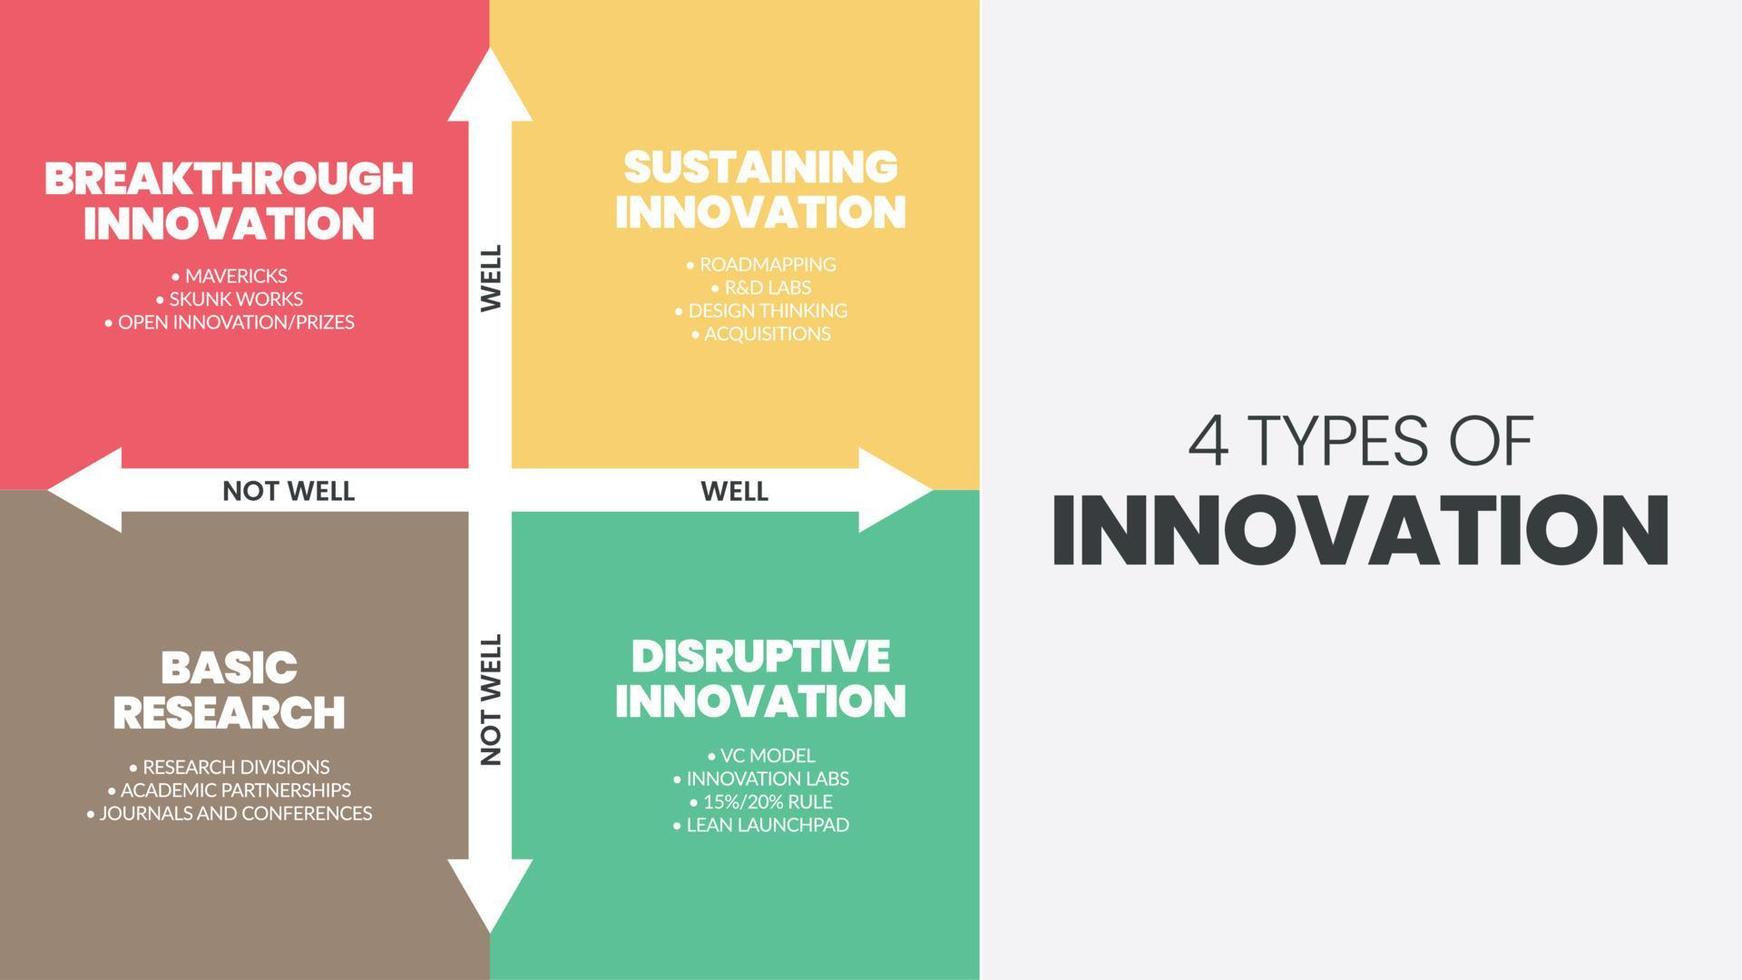 4 Types of Innovation matrix infographic presentation is a vector illustration in four elements Basic research, incremental, disruptive, breakthrough, and sustaining innovation for development